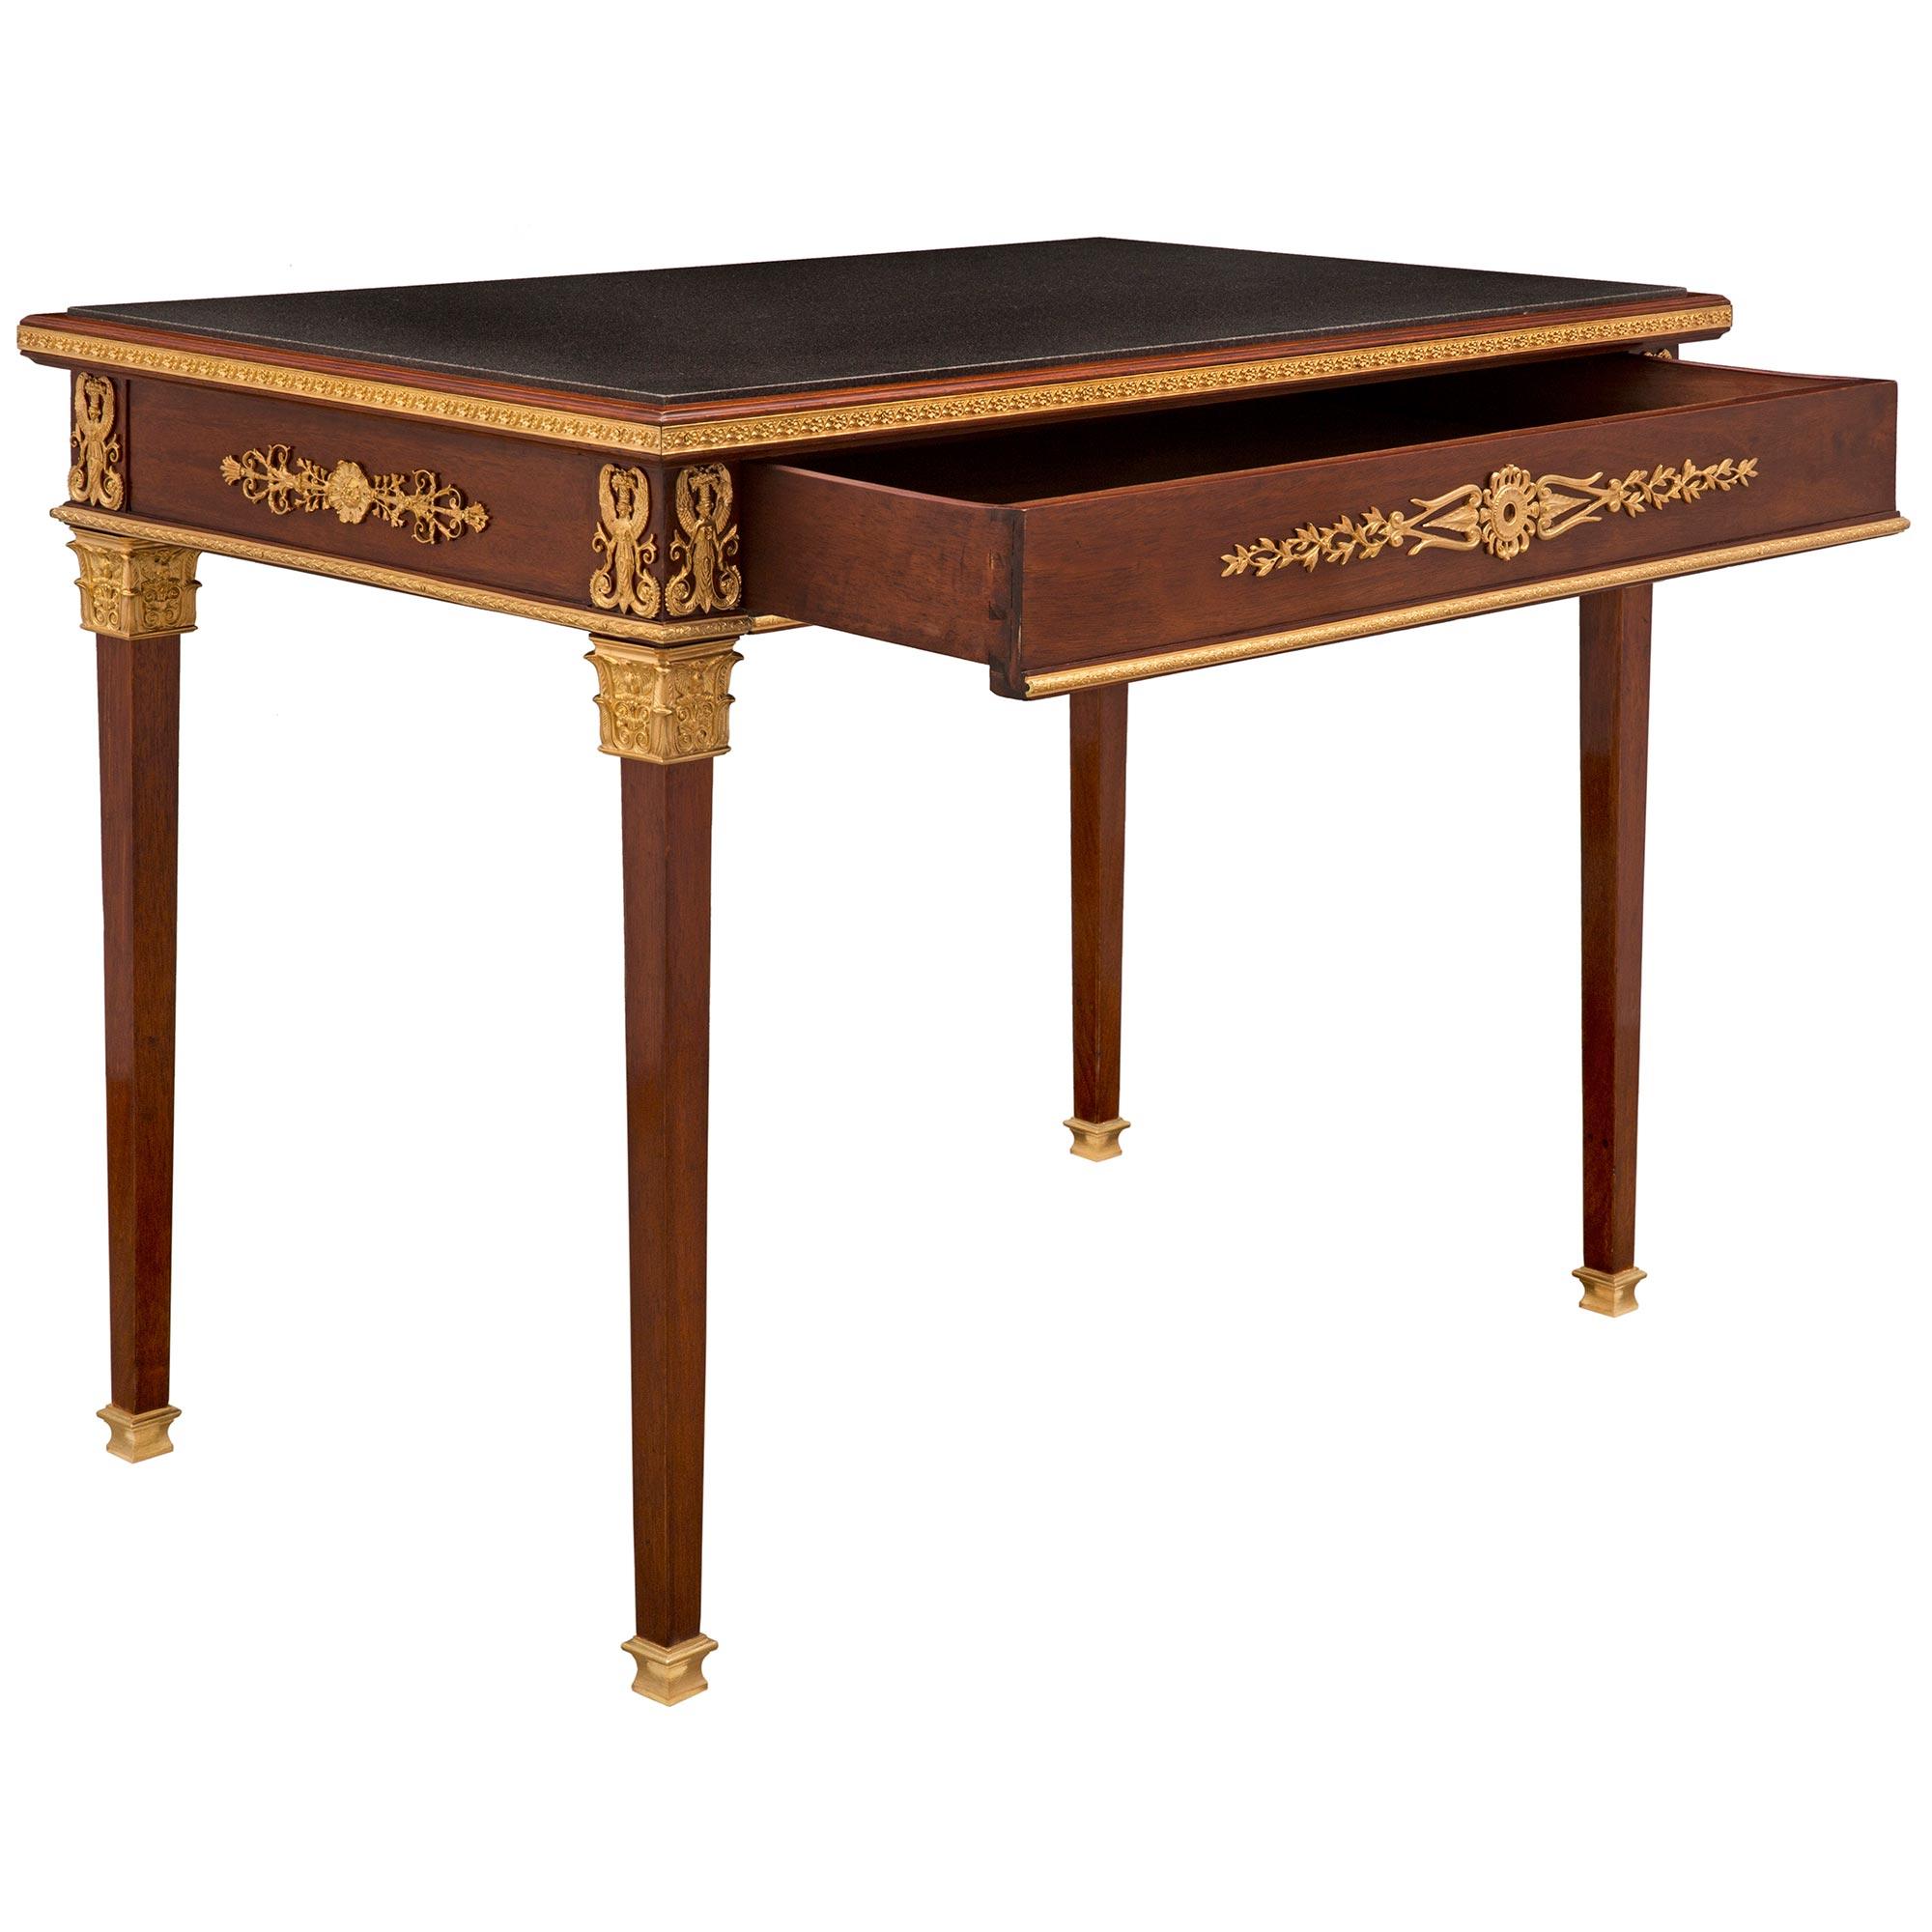 French 19th Century Neoclassical Style Mahogany, Ormolu and Slate Table/Desk For Sale 1